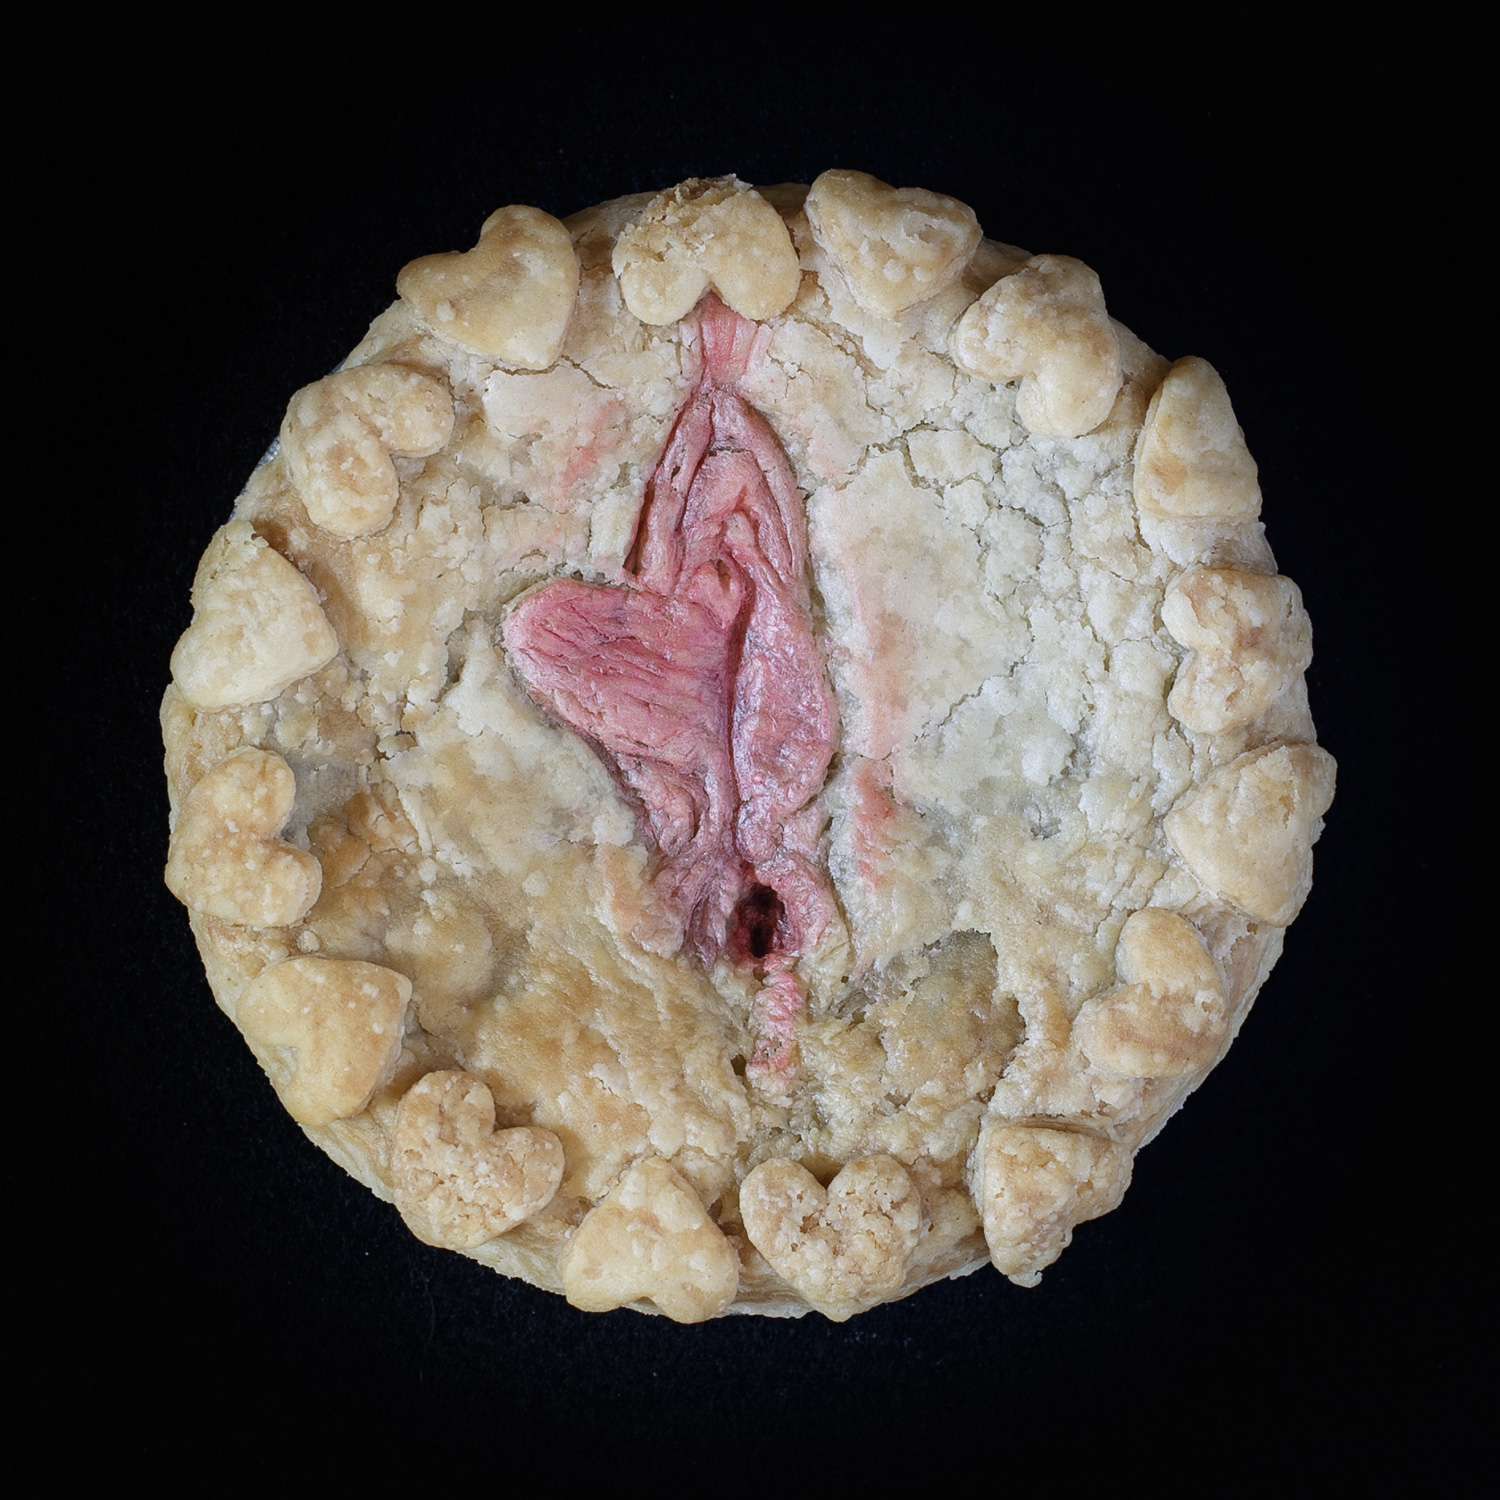 Baked pie decorated with hand-sculpted vulva art on a black background 